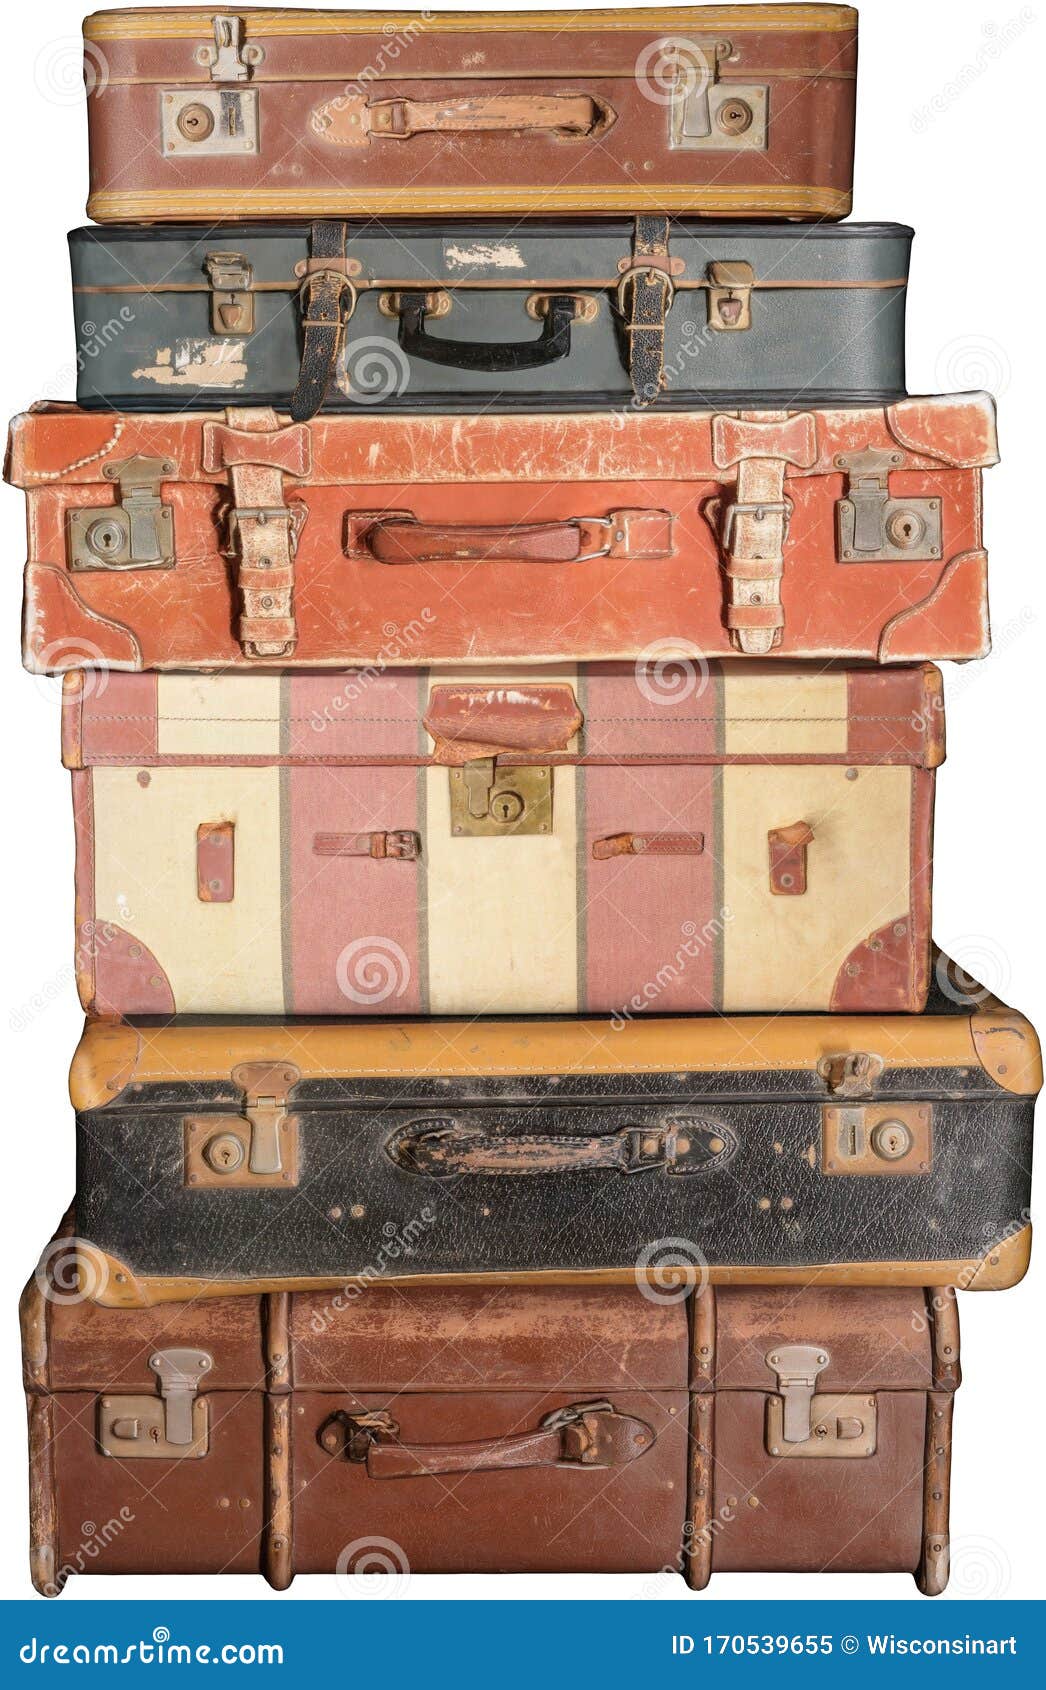 old vintage suitcase, suitcases, , luggage